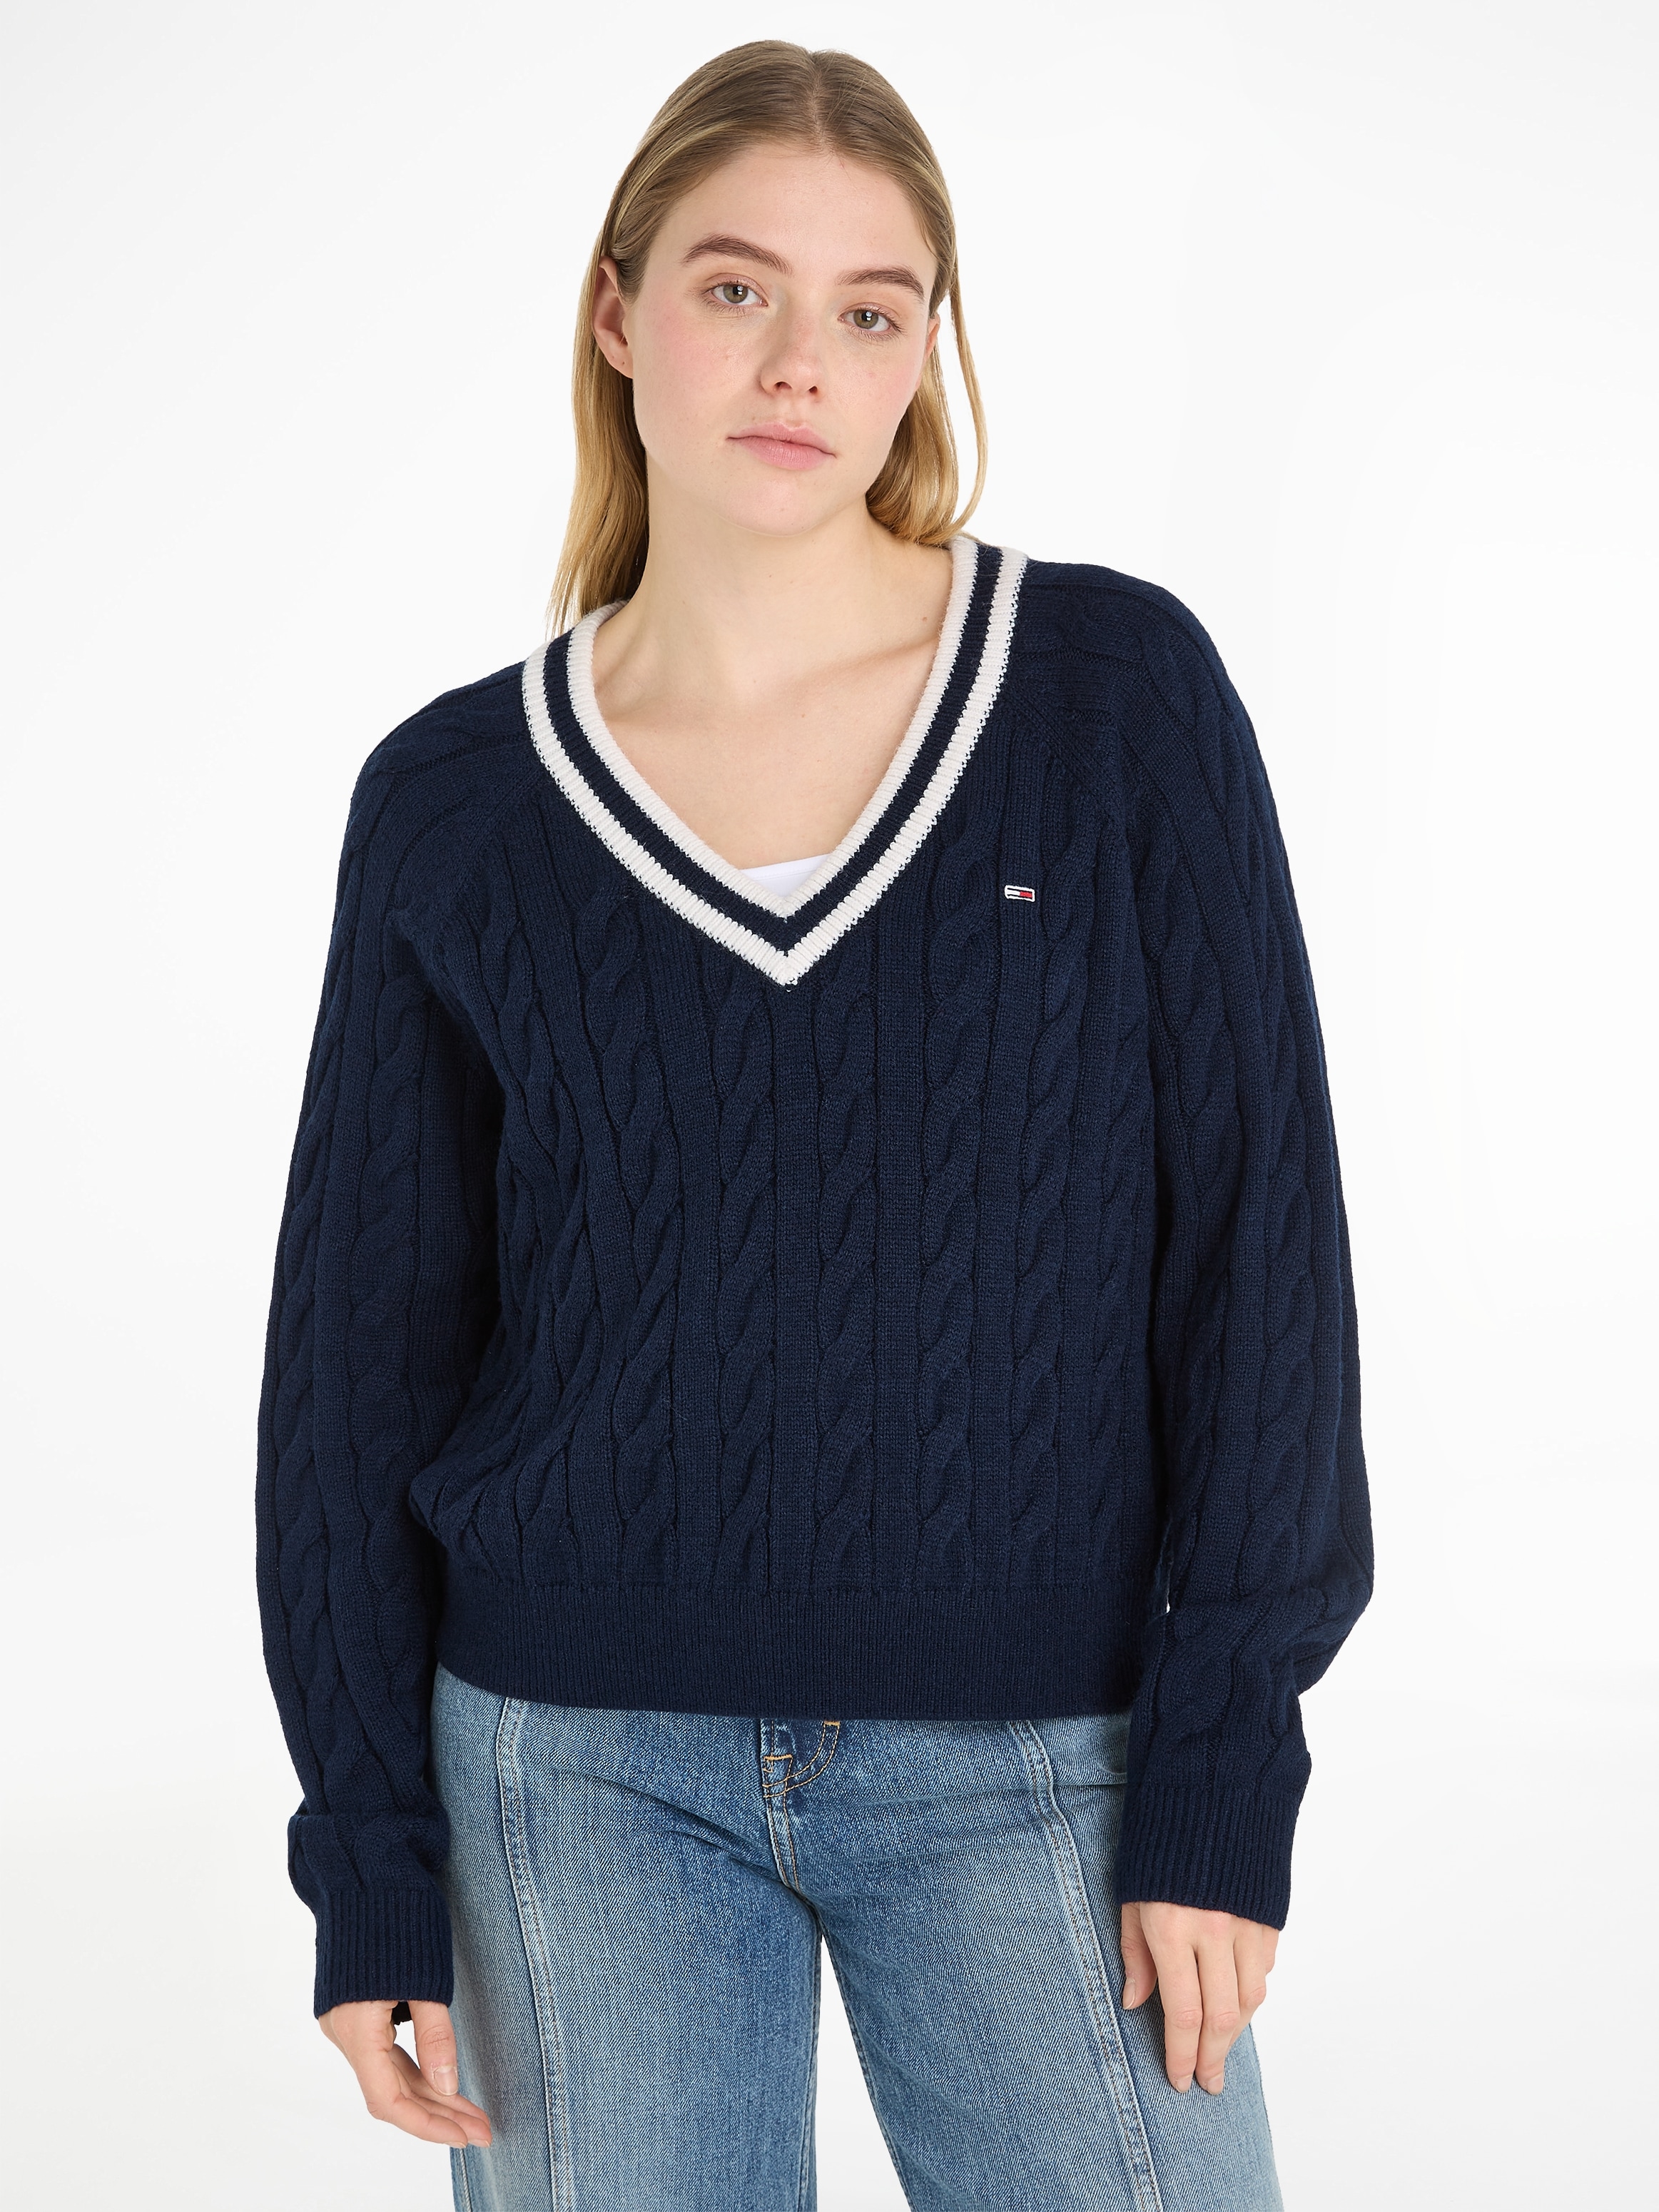 ♕ Logostickerei mit »TJW bei Jeans V-NECK CABLE V-Ausschnitt-Pullover SWEATER«, Tommy